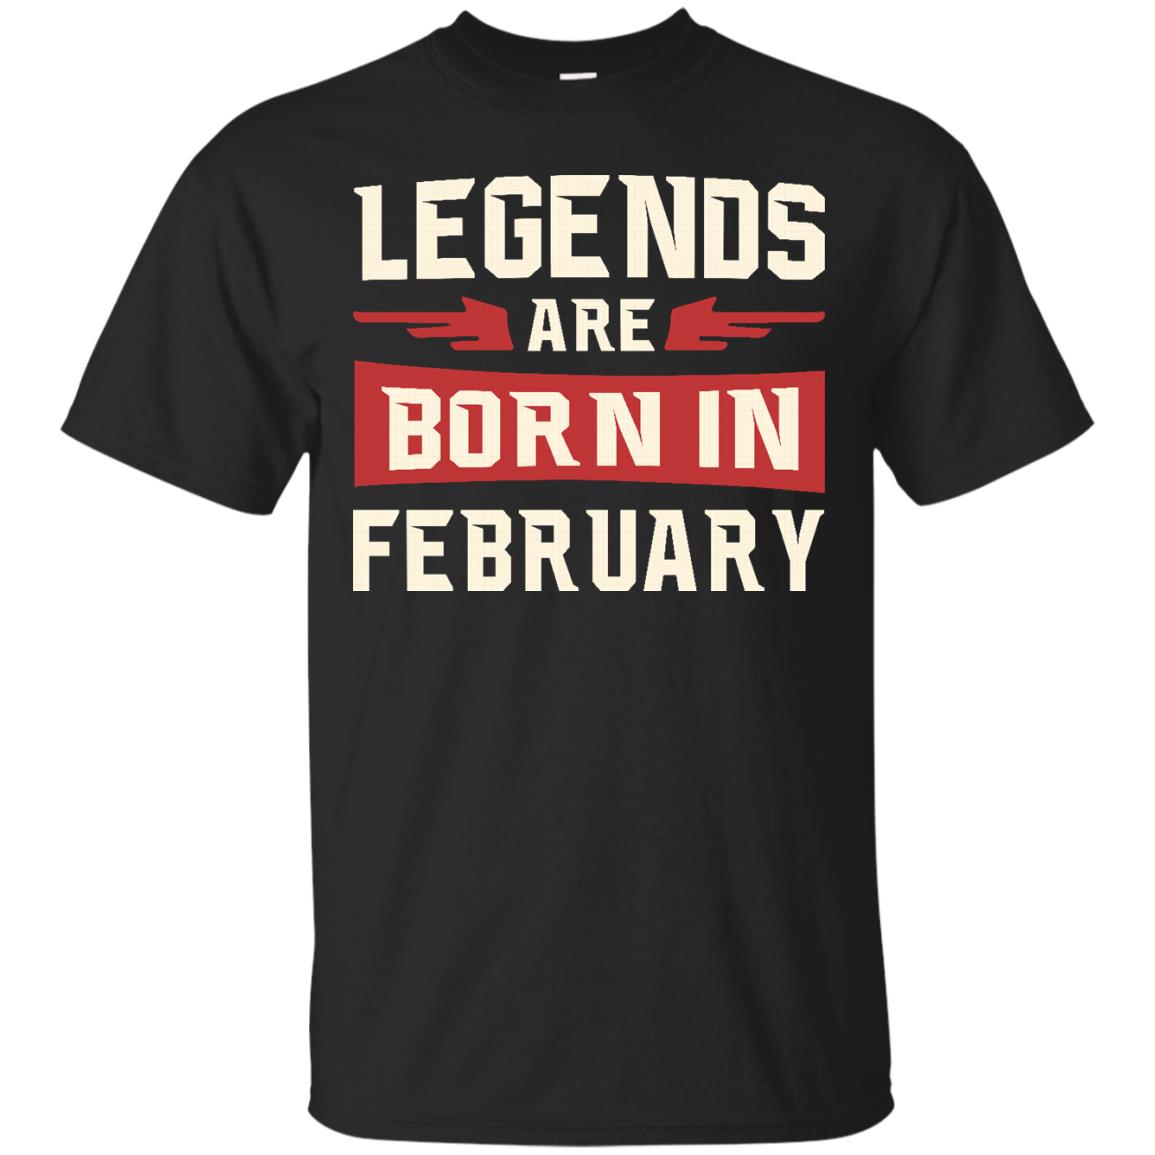 Jason Statham: legends are born in February shirt, hoodie